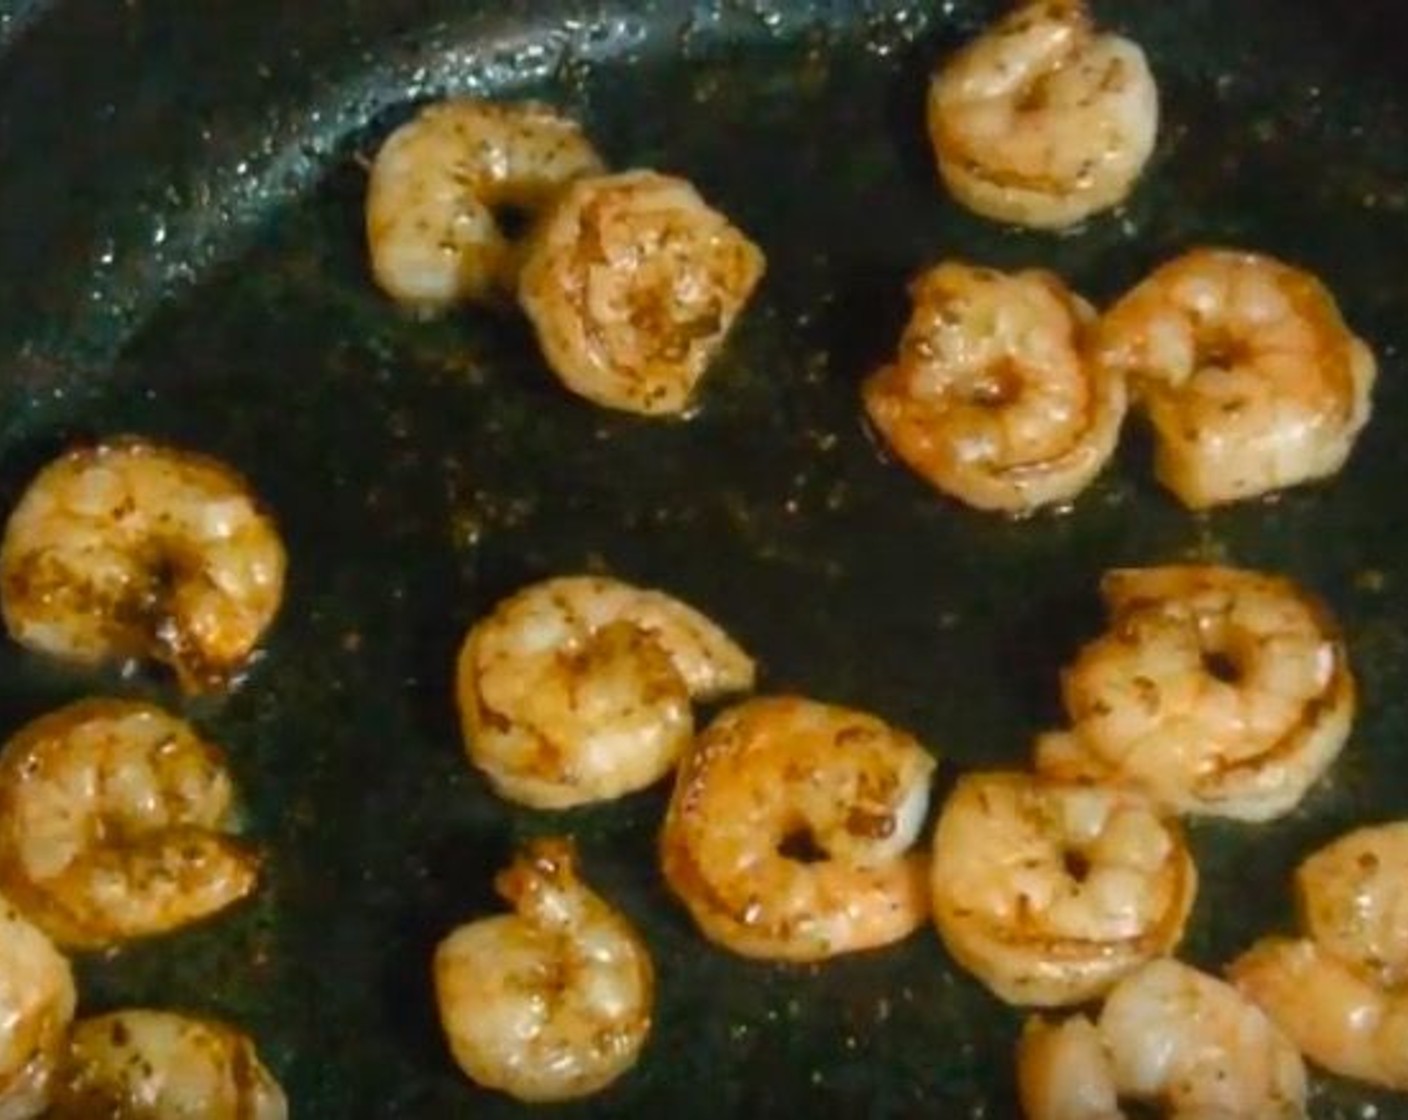 step 11 In a pan, melt the Salted Butter (2 1/2 Tbsp). Add the Shrimp (4.5 oz) and season with Ground Black Pepper (1 tsp). Cook for 2 minutes on each side, stirring occasionally to make sure shrimp is coated.